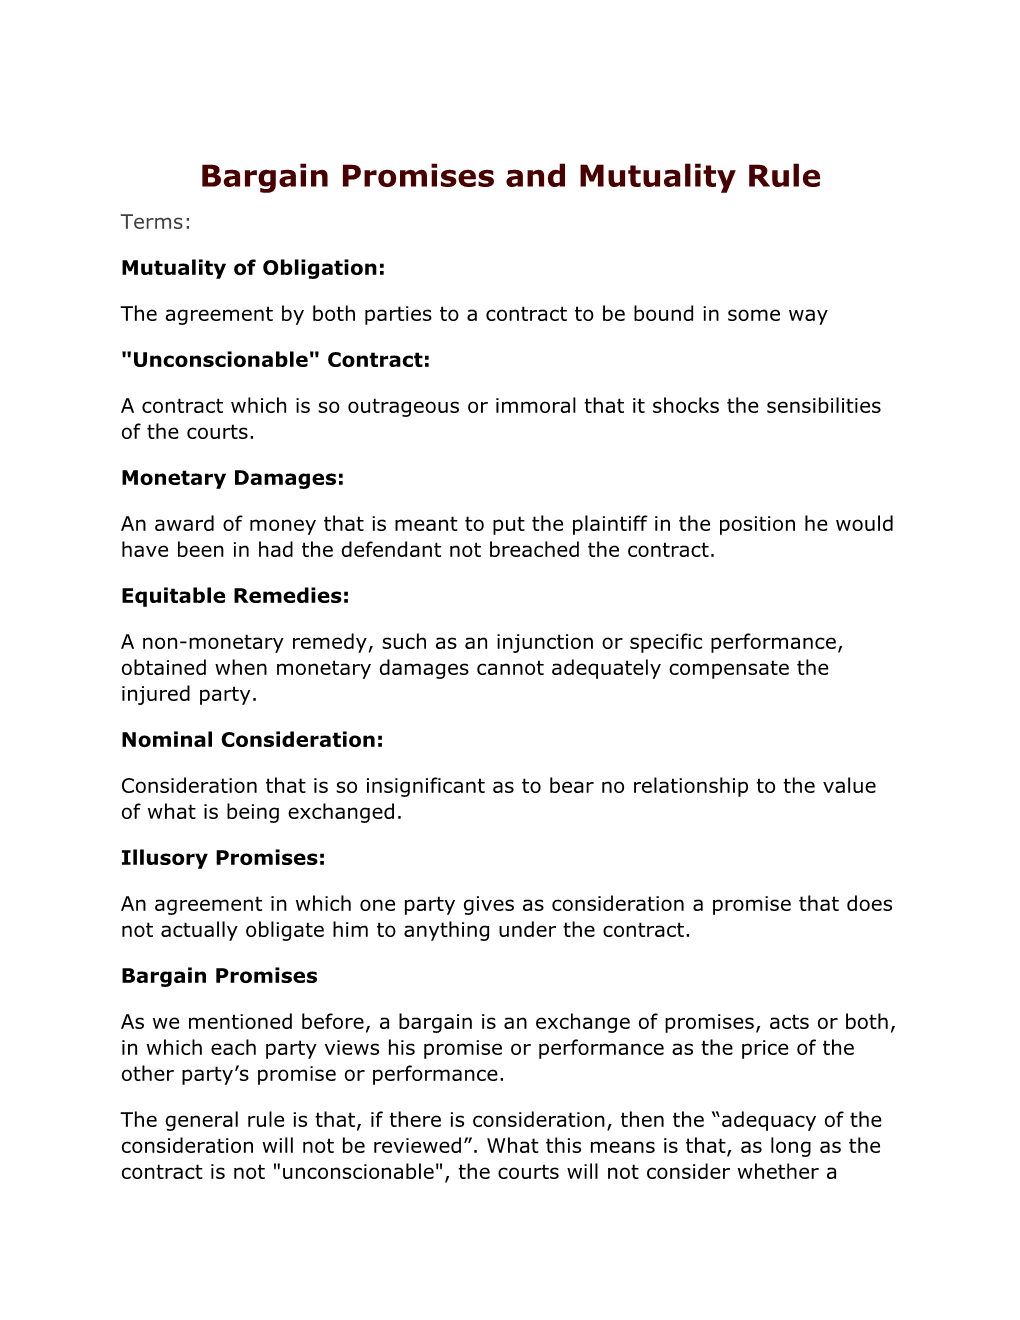 Bargain Promises and Mutuality Rule